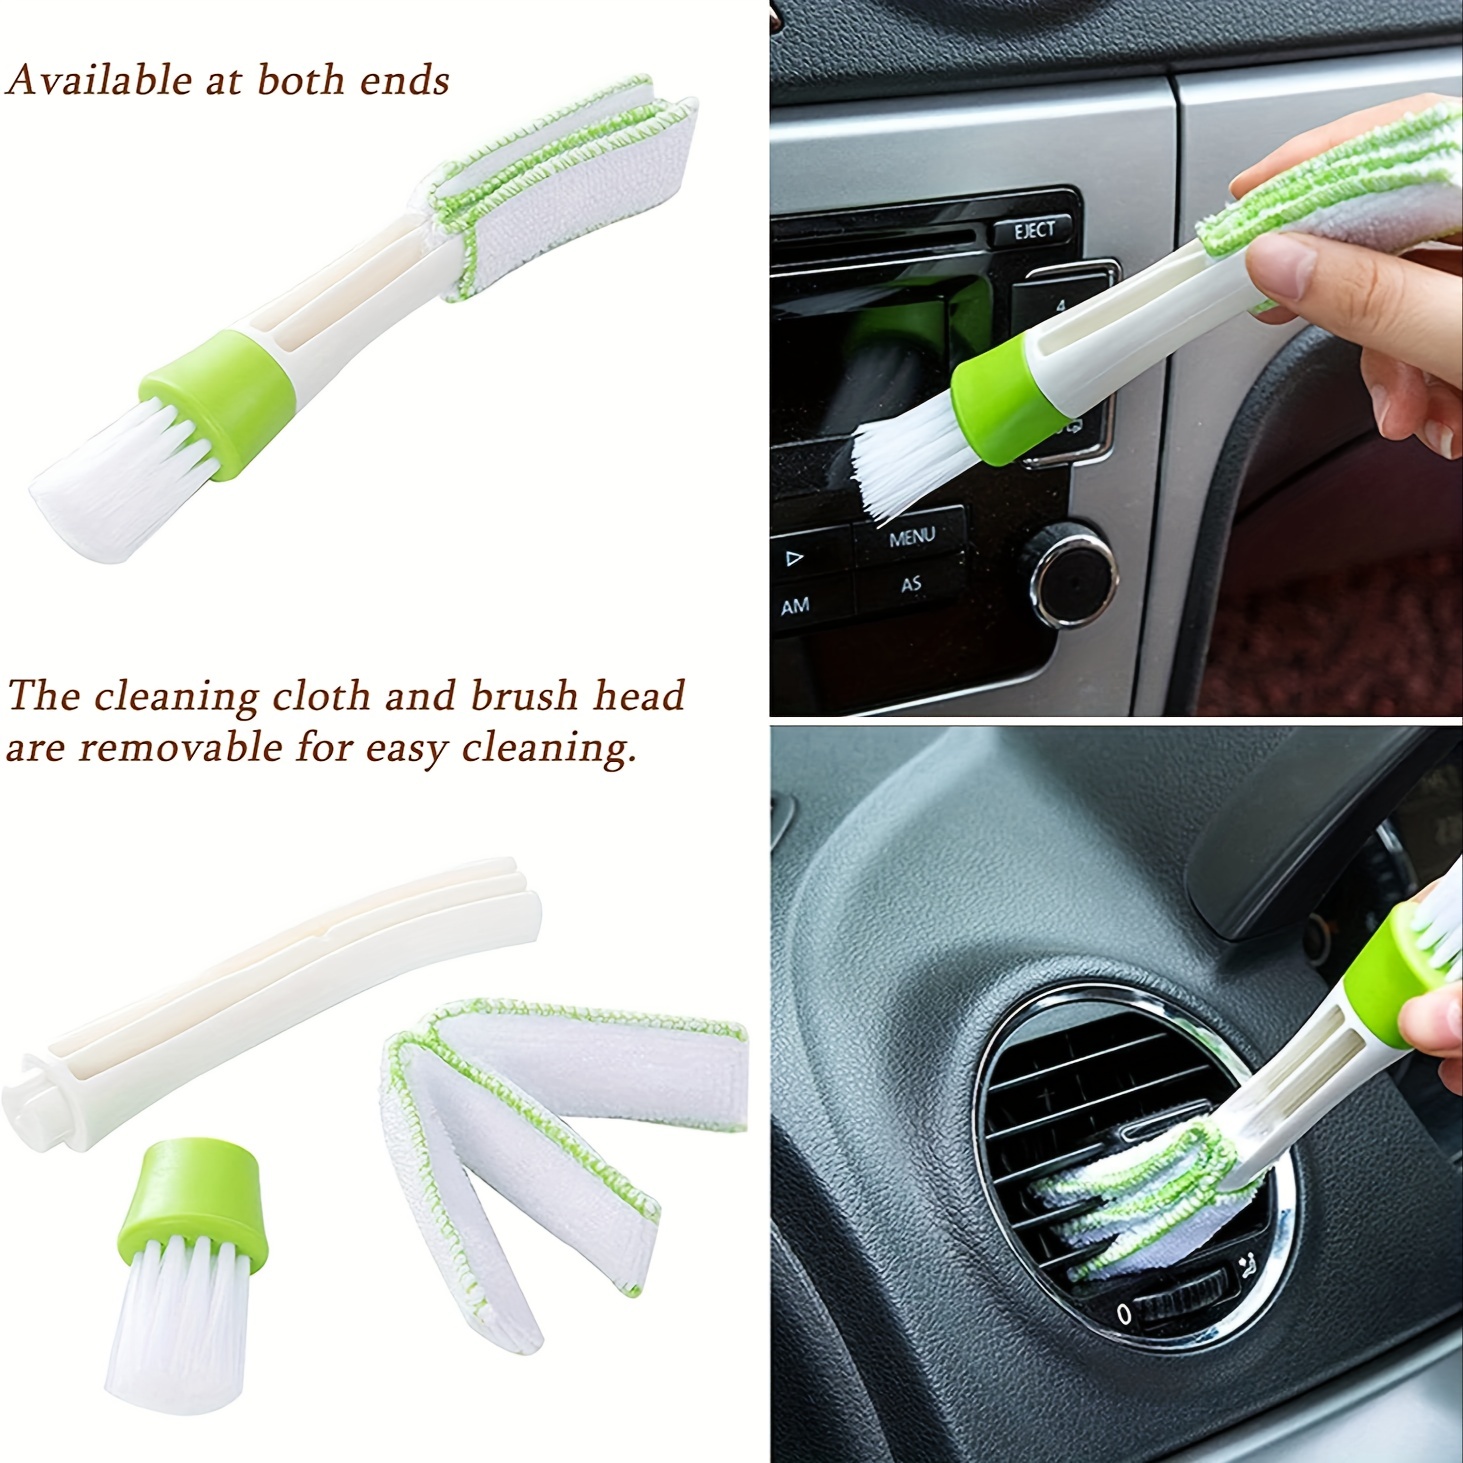  8 Pcs Hand-held Groove Gap Cleaning Tools,Door Window Track Cleaning  Tools Groove Corner Crevice Cleaning Brushes for Sliding Door/Tile  Lines/Shutter/Car Vents/Air Conditioner/Keyboard : Health & Household